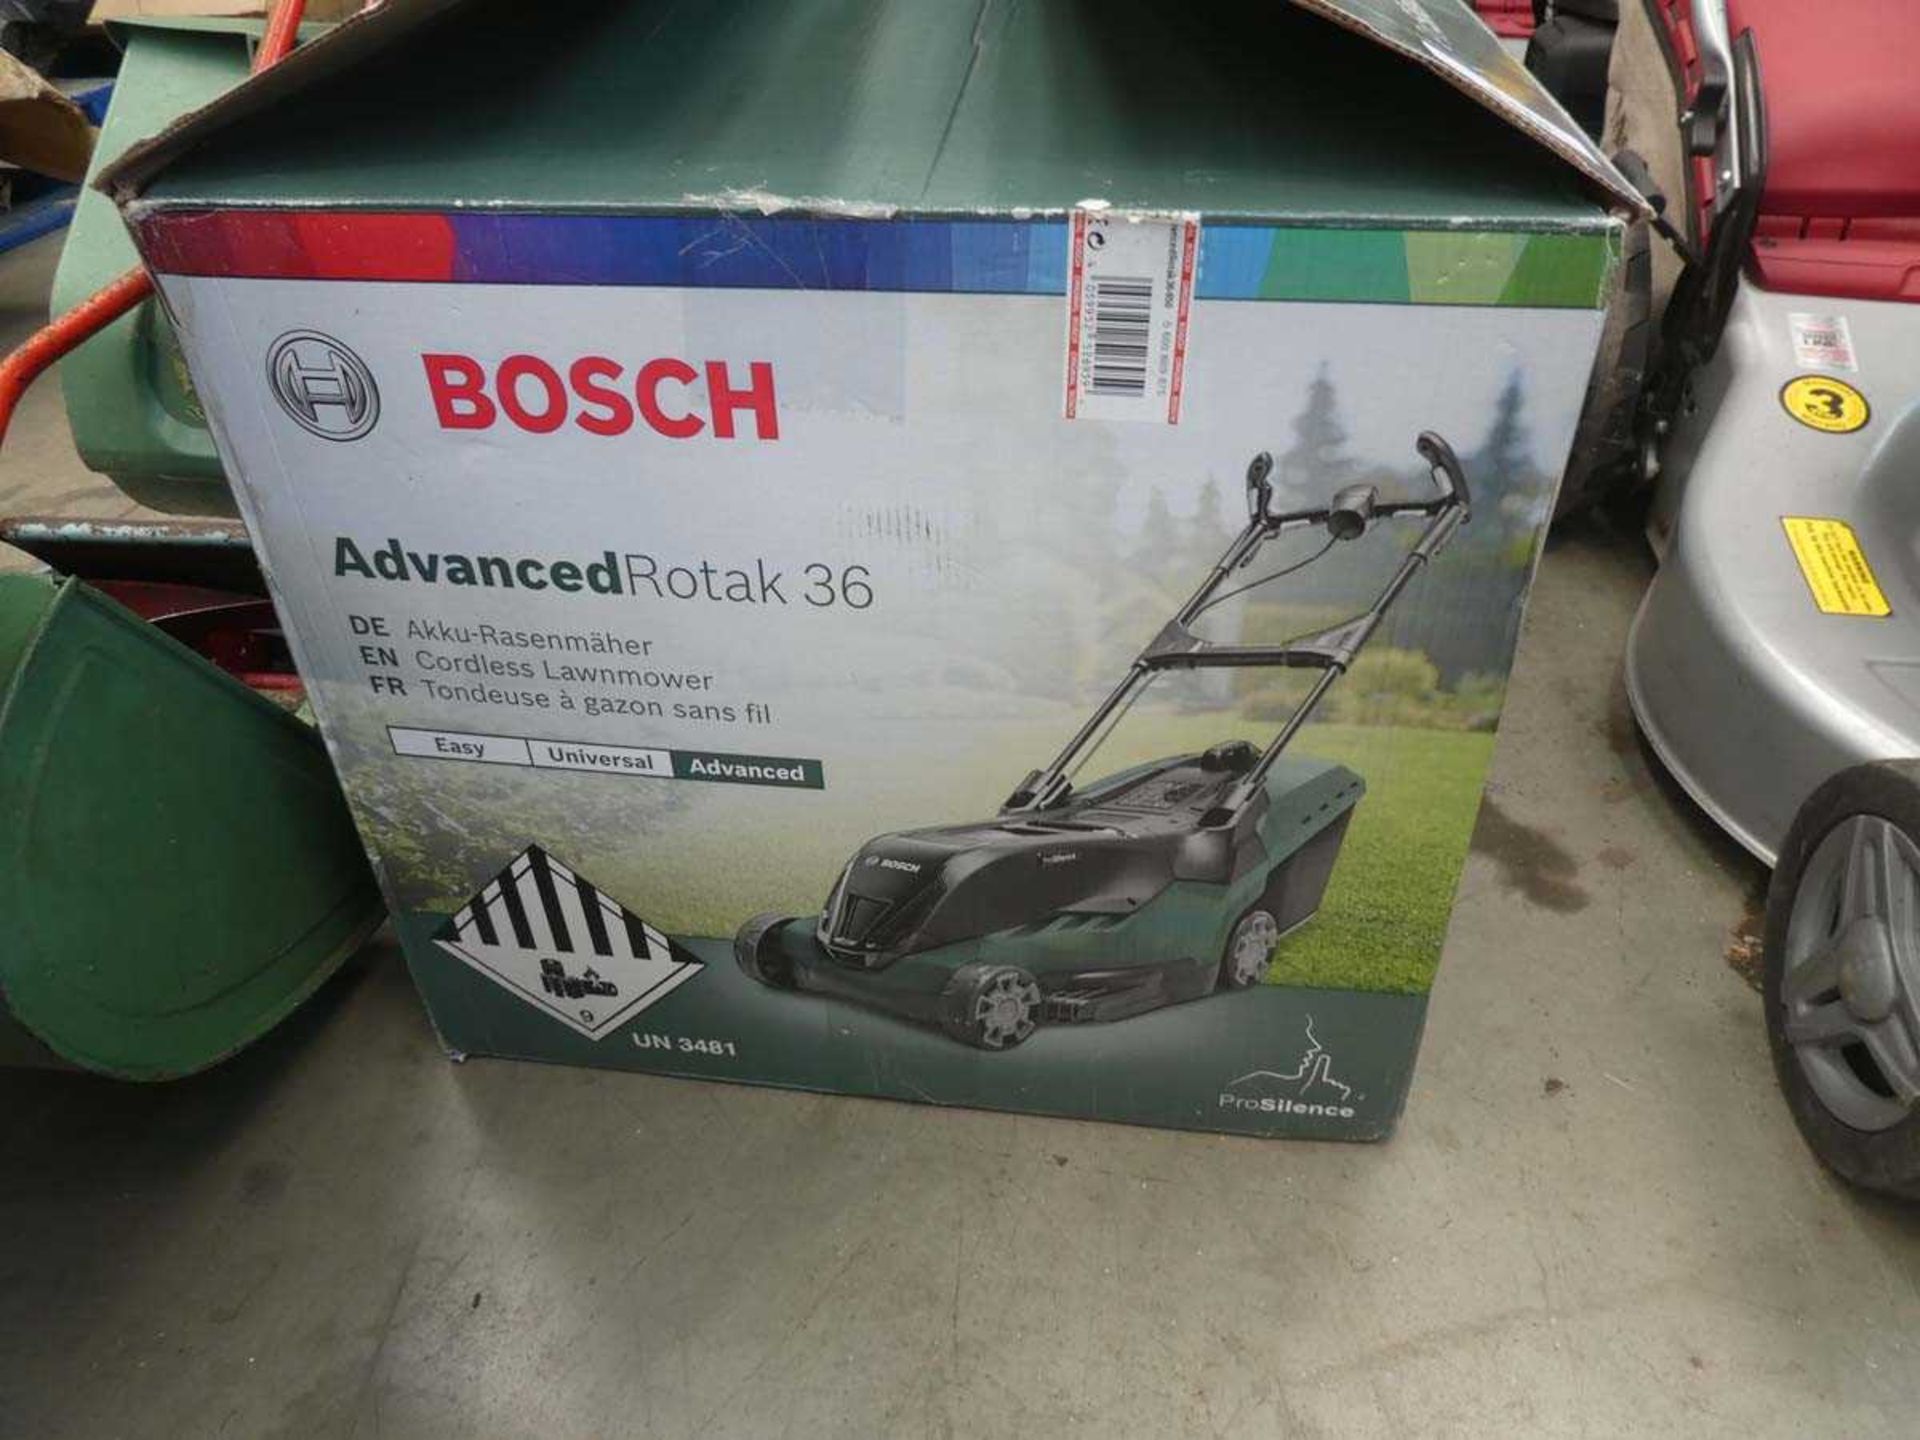 +VAT Bosch Advanced Rotak 36 battery-powered rotary lawnmower with 1 battery and charger